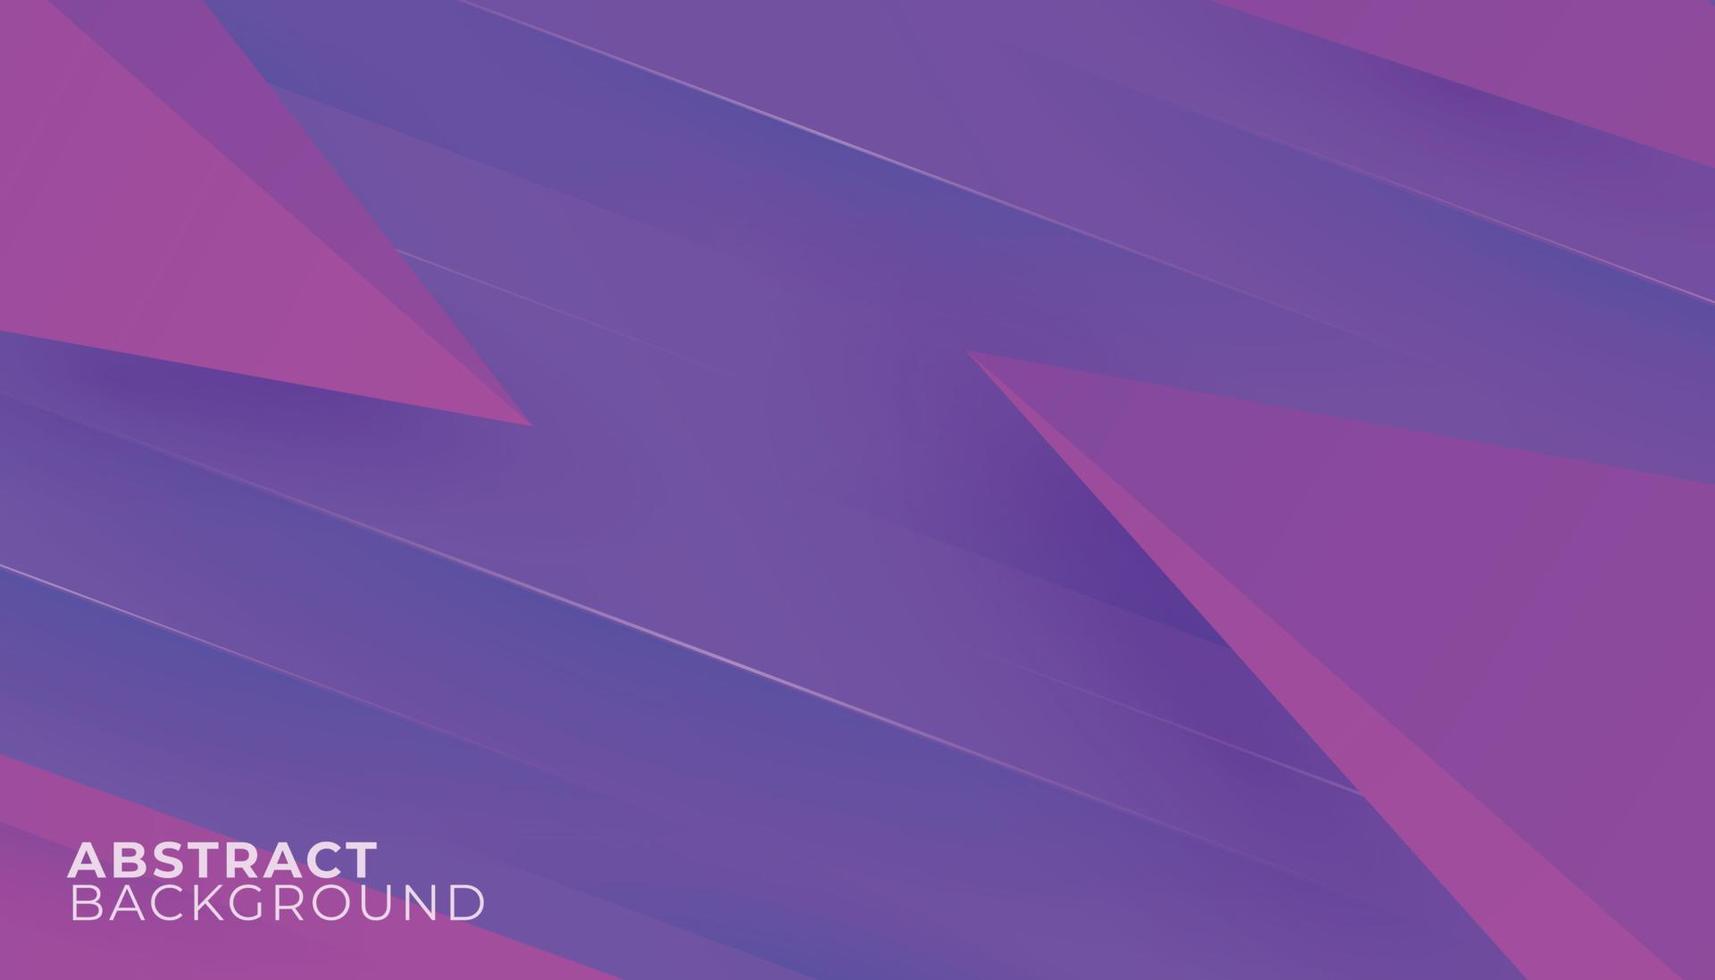 Abstract Pink Purple Geometric Background 3D Realistic Triangle Shapes. Futuristic Design Poster. Vector Illustration